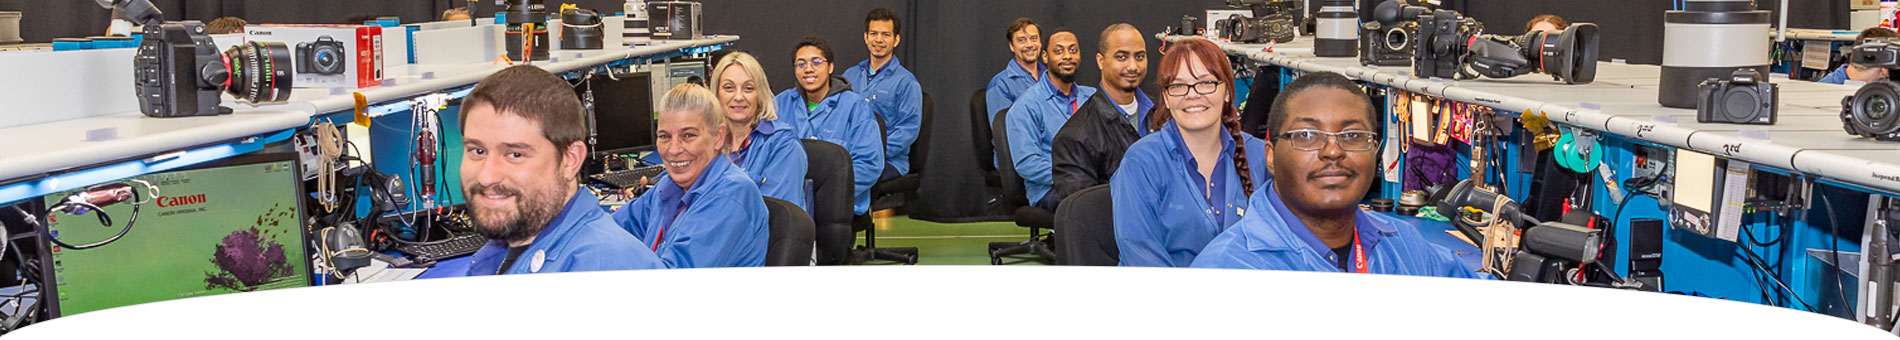 Image of Canon Virginia employees sitting at computer desk stations and smiling